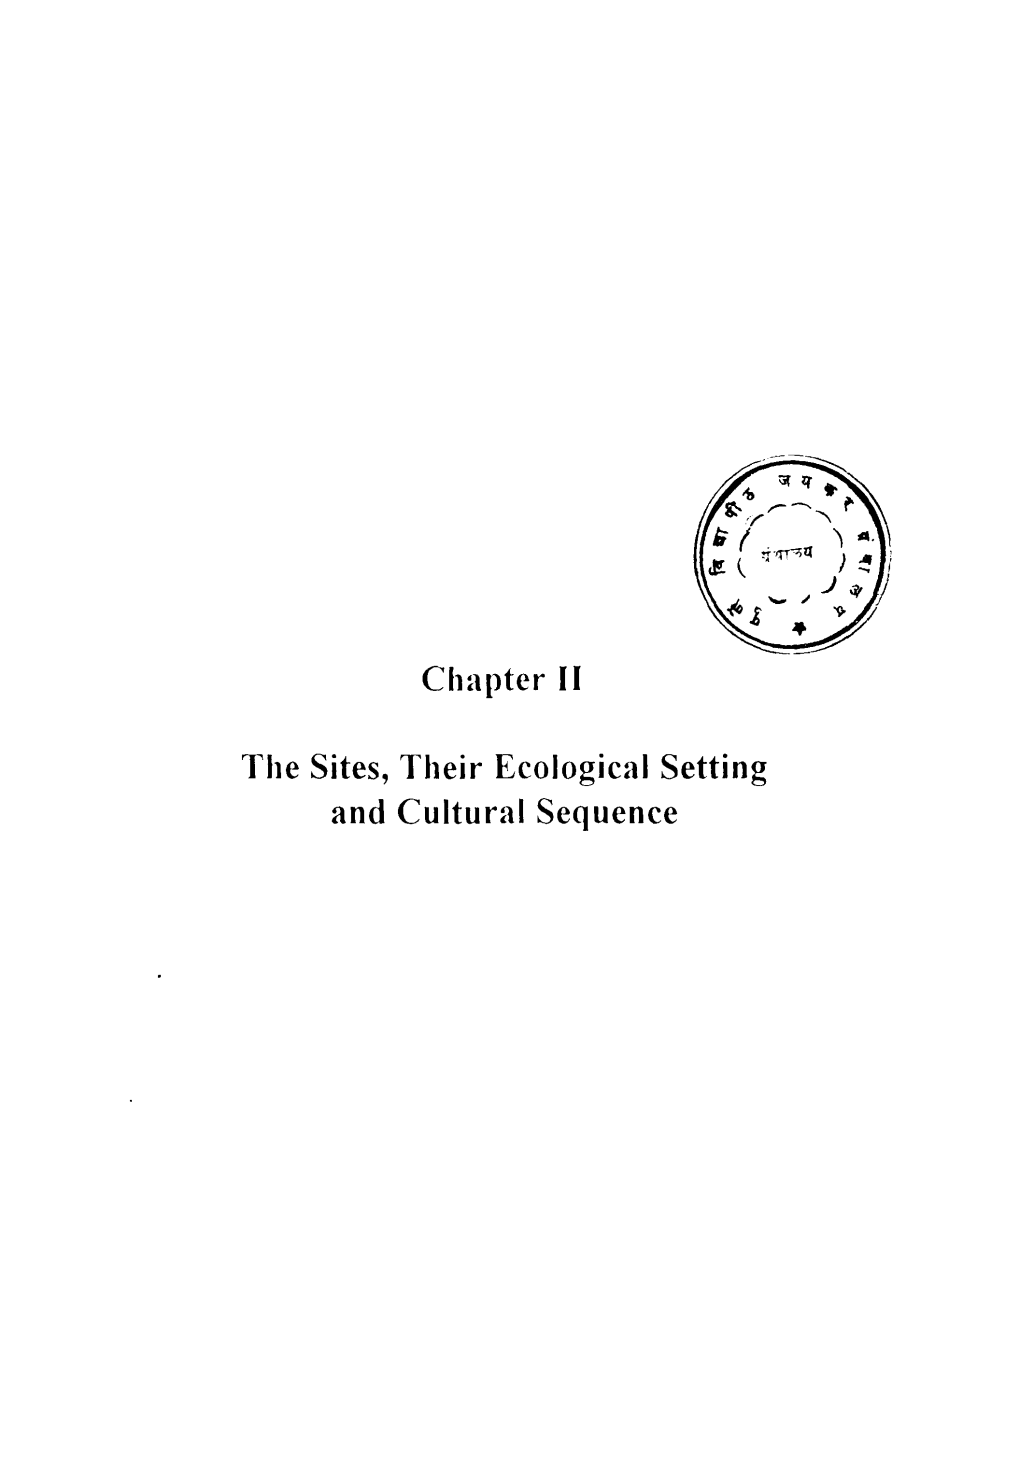 Chapter H the Sites, Their Ecological Setting and Cultural Sequence